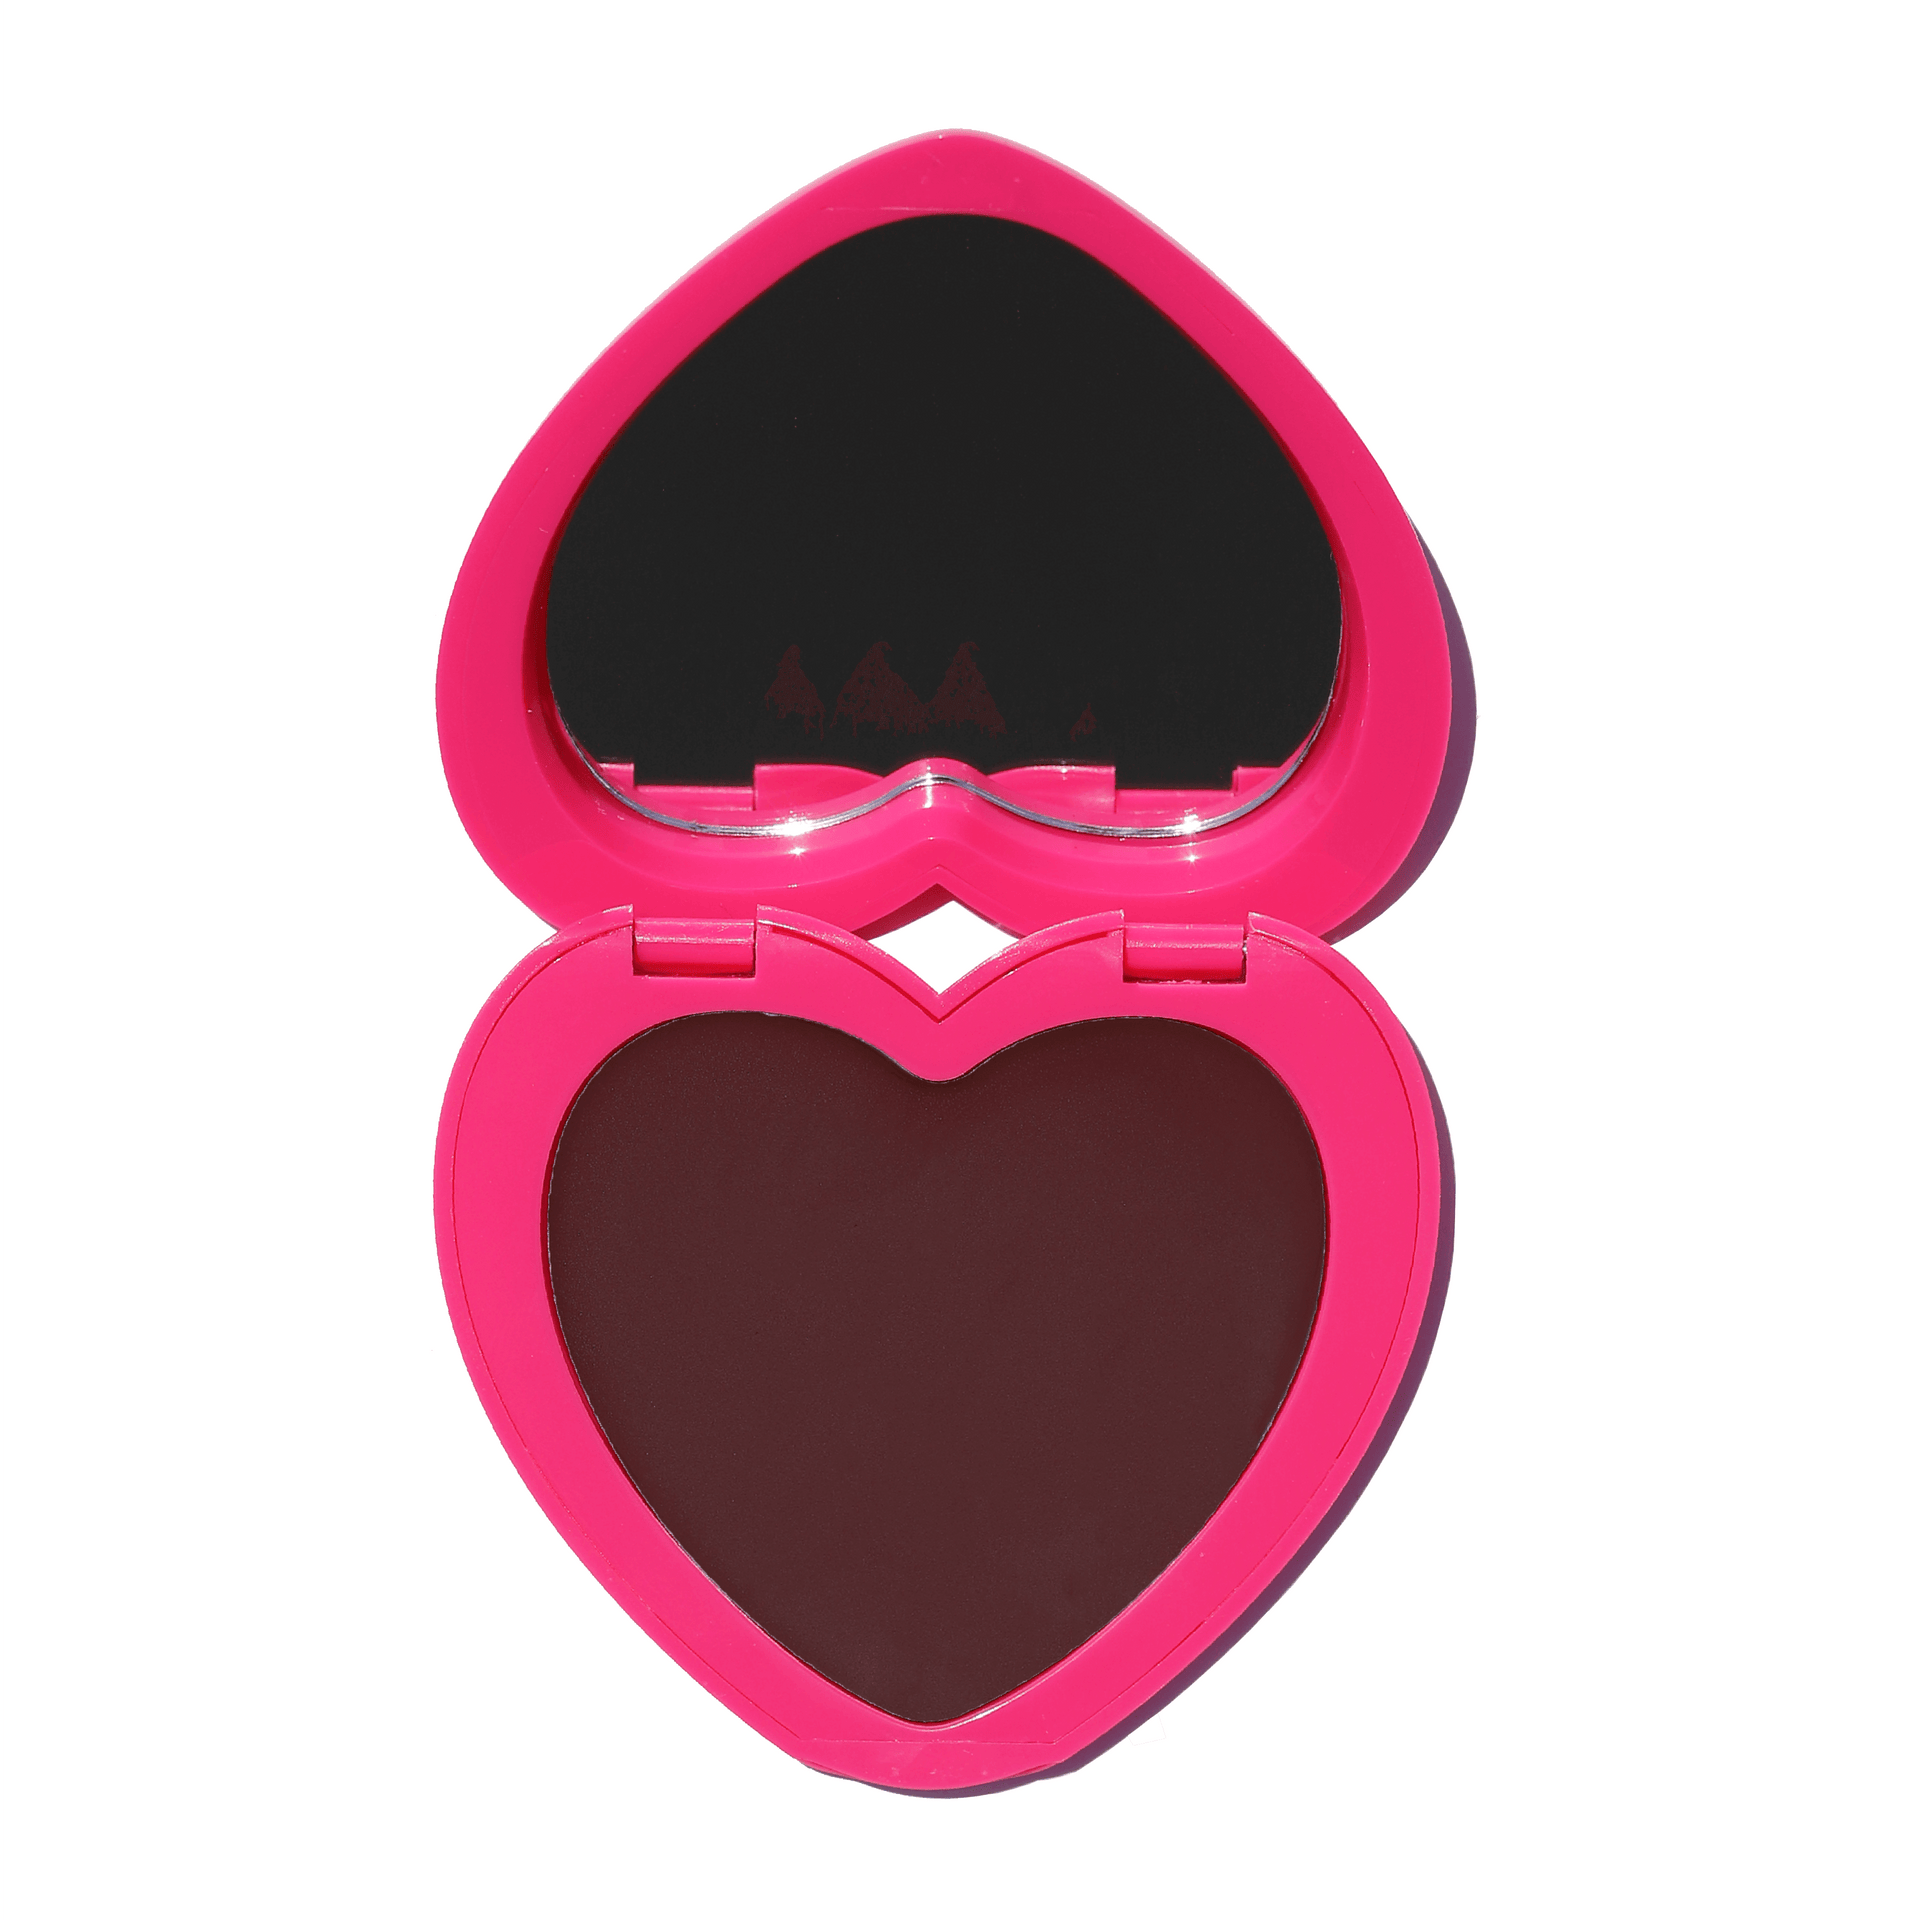 Heart-shaped compact of Candy Paint Cheek + Lip Tint in shade, with mirror and vibrant, blendable cream blush for a dewy, radiant finish.